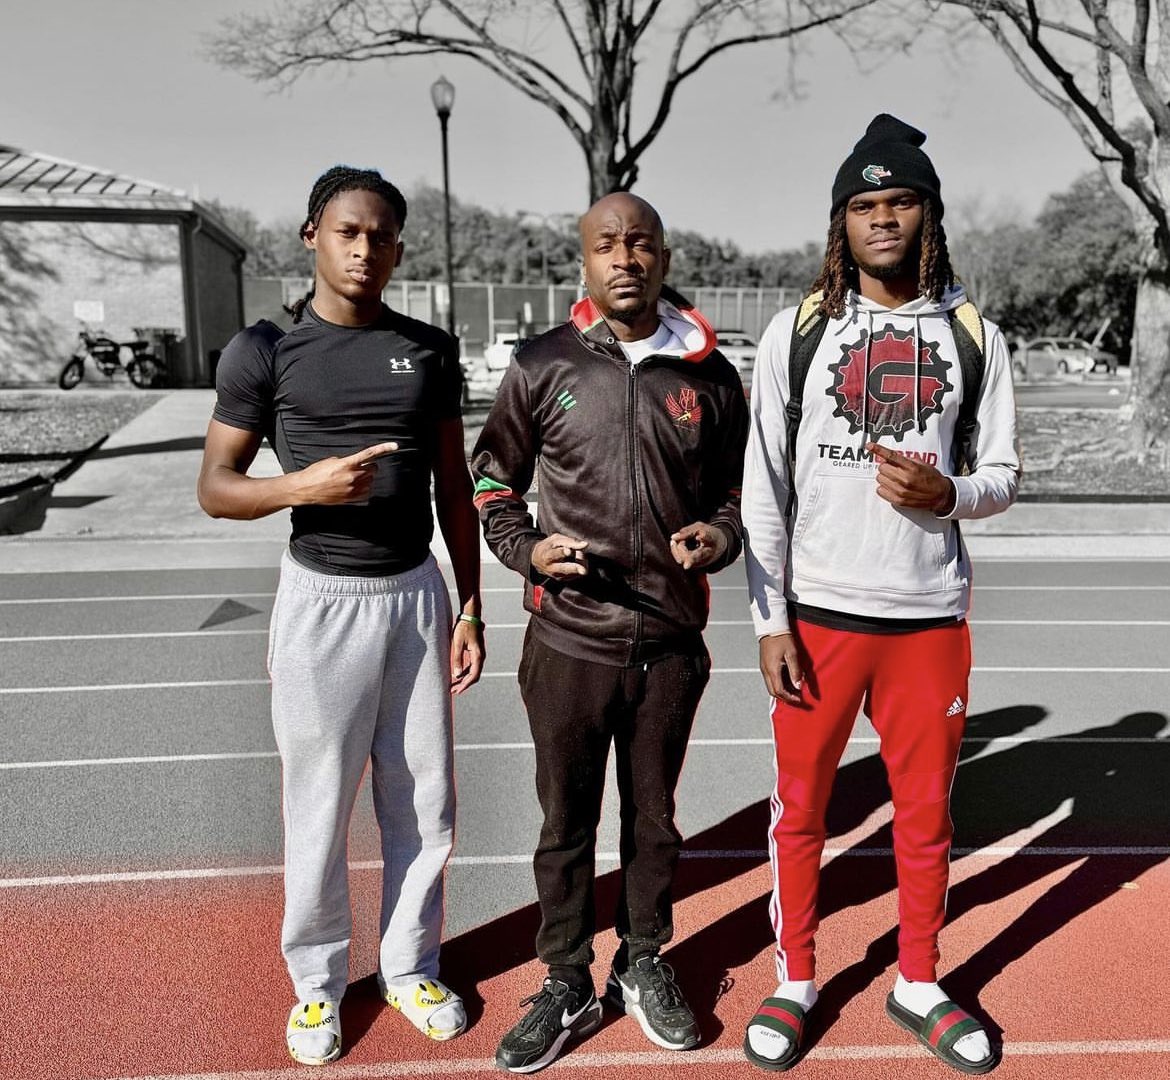 We went to church & then rite to the track afterwards! No days off or those results will be off lol 🤌🏿🦍🙏🏿 @JurneeRobinson @jailahrobinson1 @AkeemDC @d1tee1 @madetrackclub #jailahrobinson #lambojai #jurneerobinson #maybachjurnee #tyderickbrown #akeemrahsaan